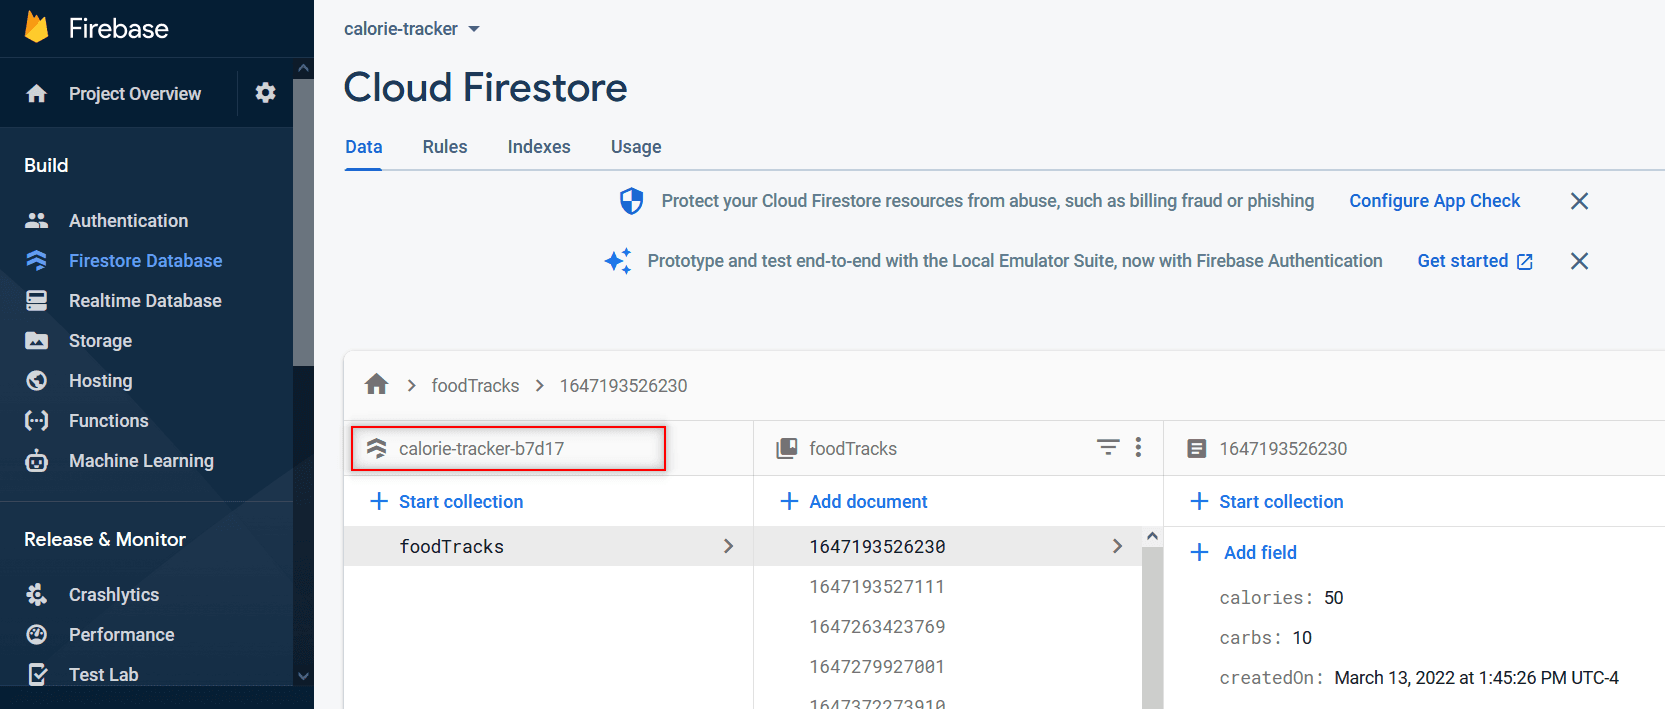 Firestore Database page showing Collection
ID